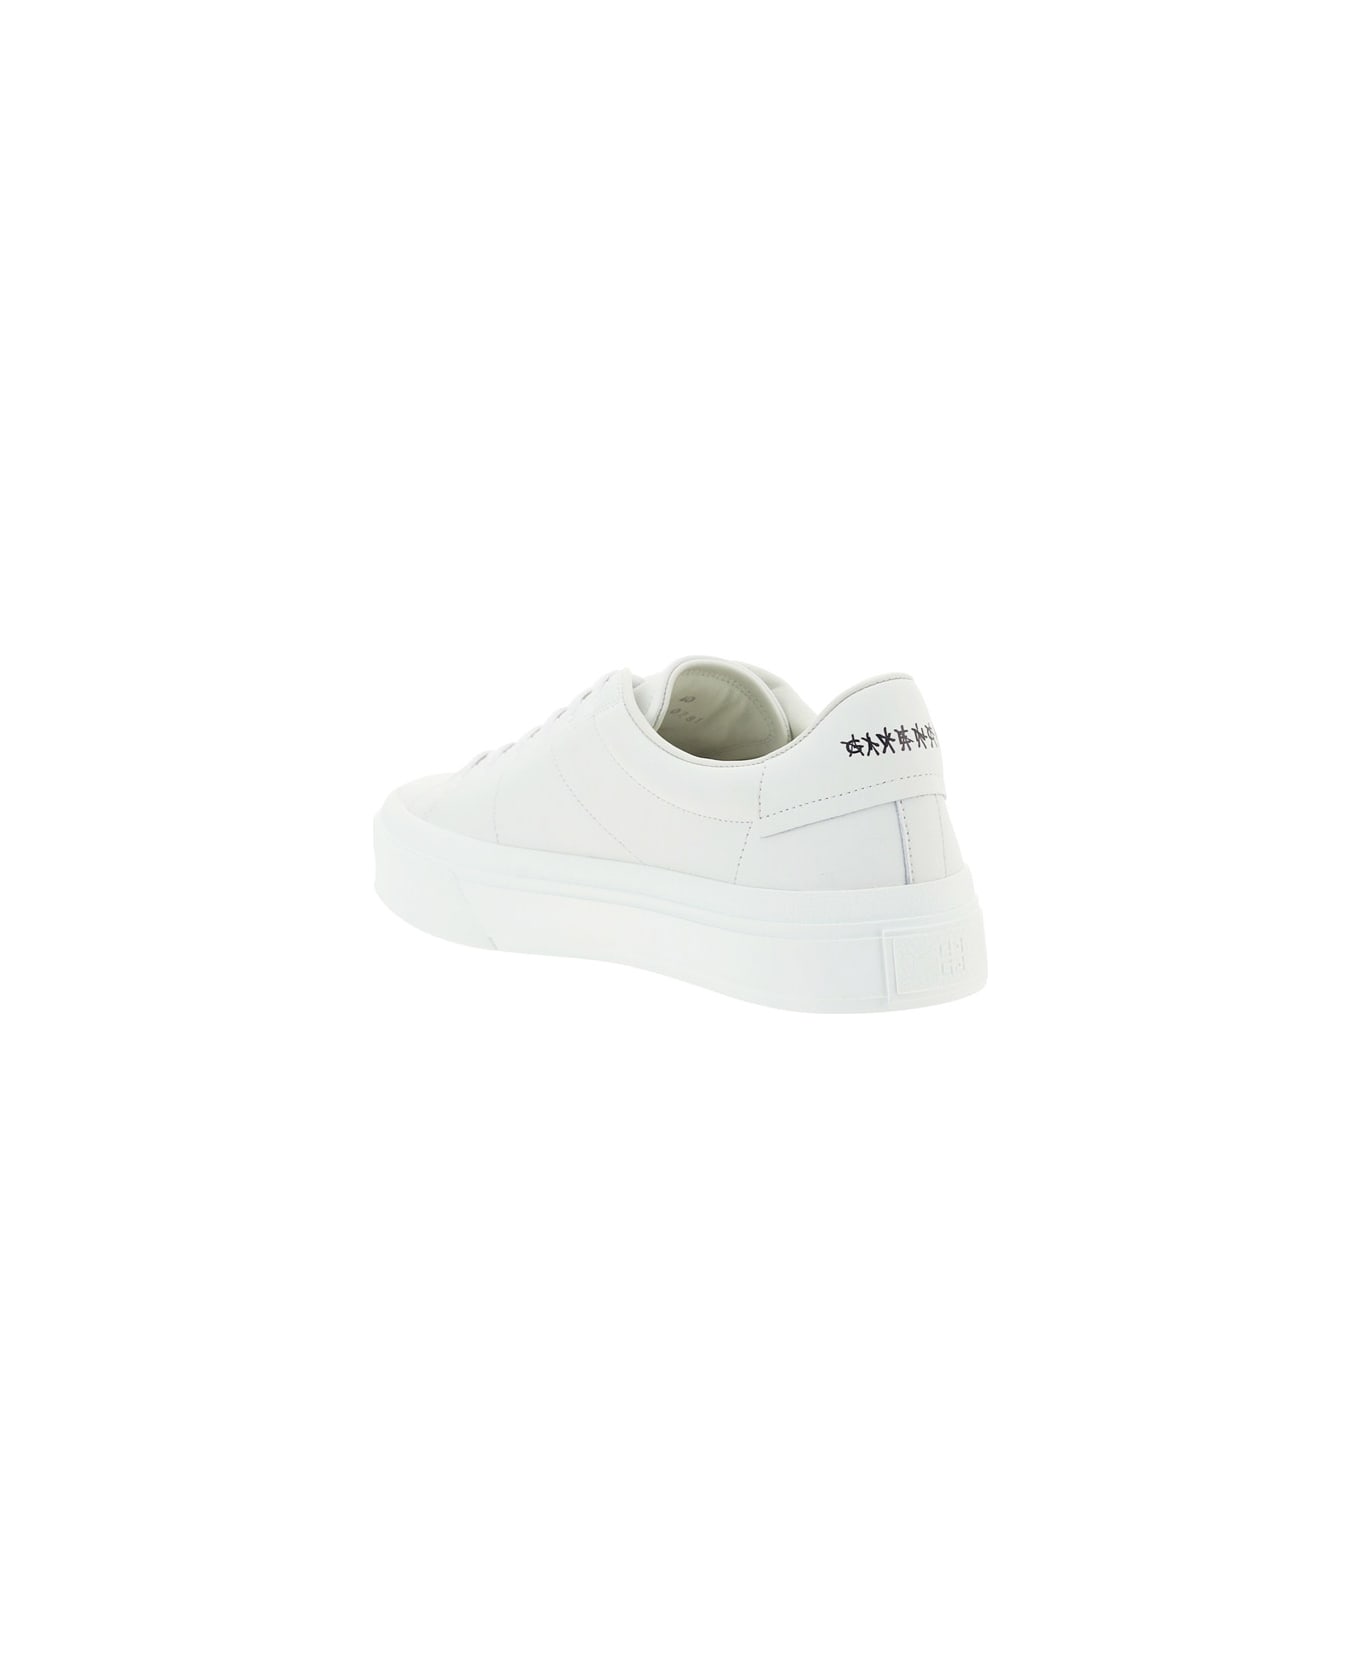 Givenchy Sneakers - White/black スニーカー